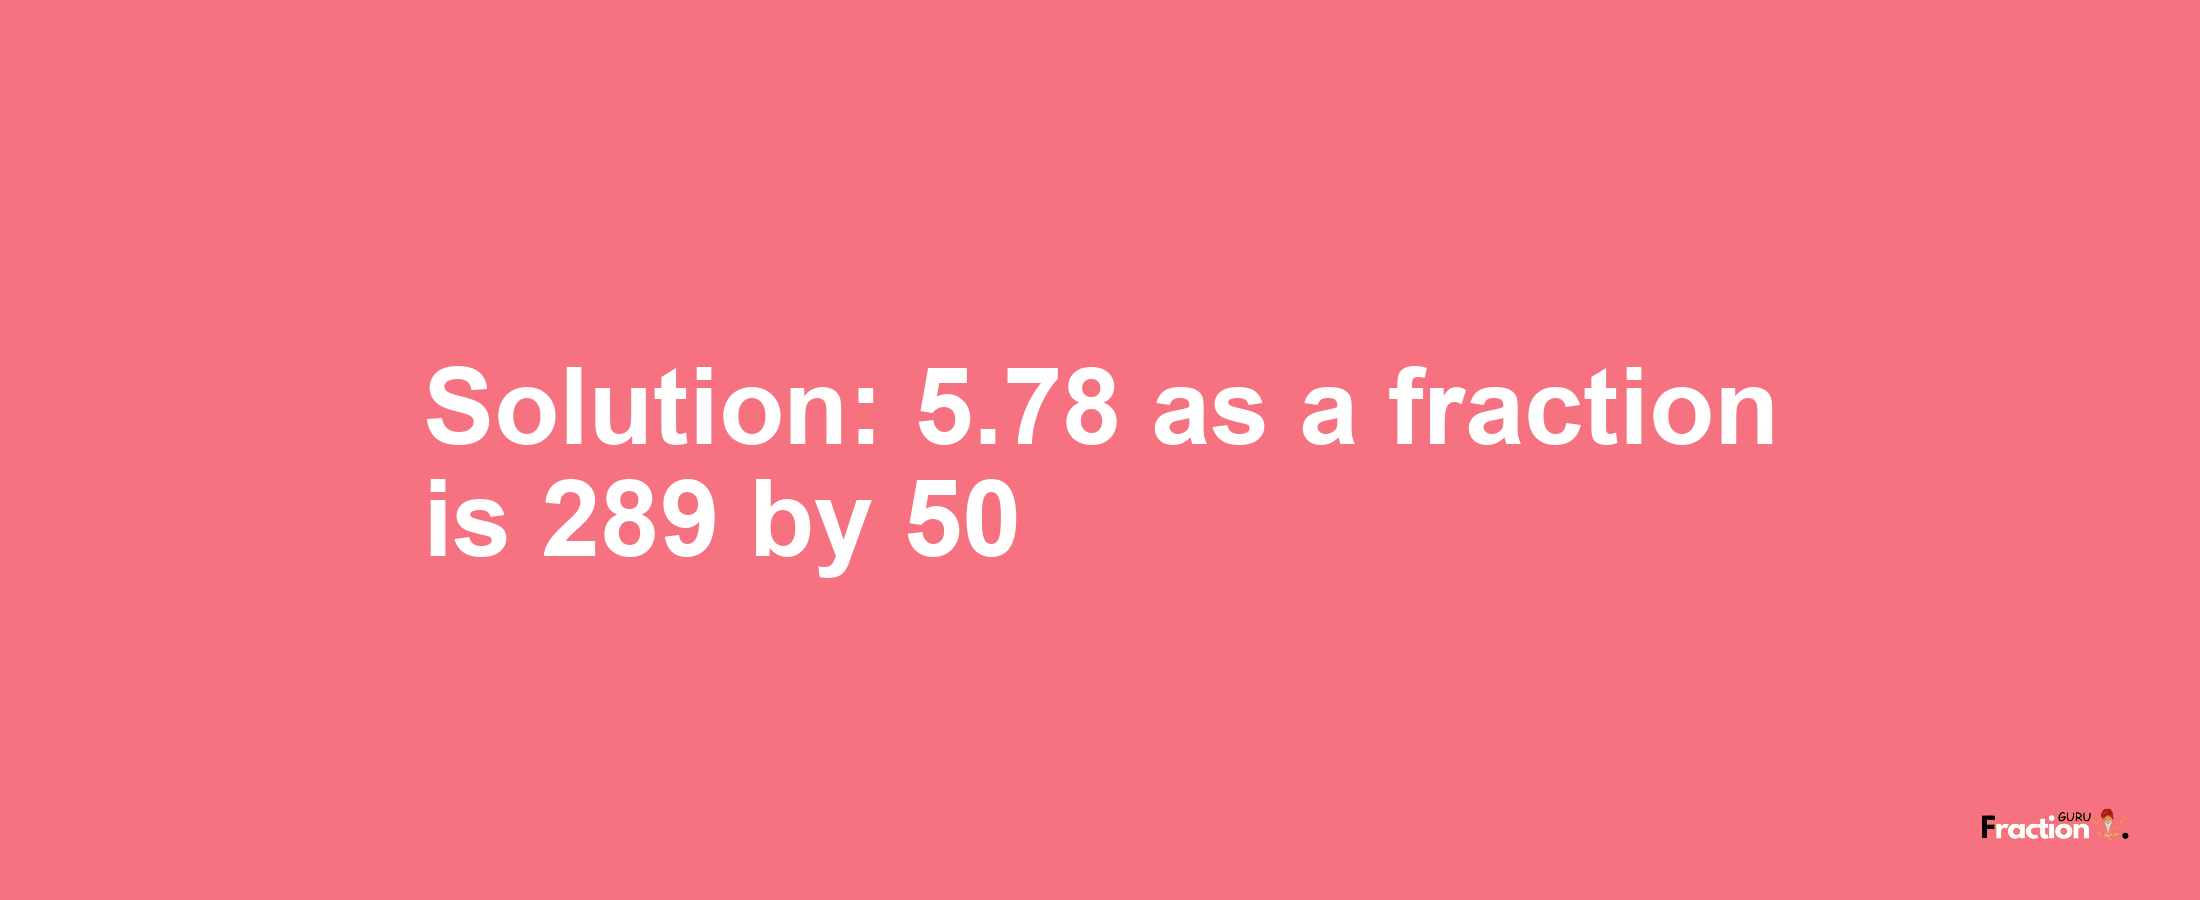 Solution:5.78 as a fraction is 289/50